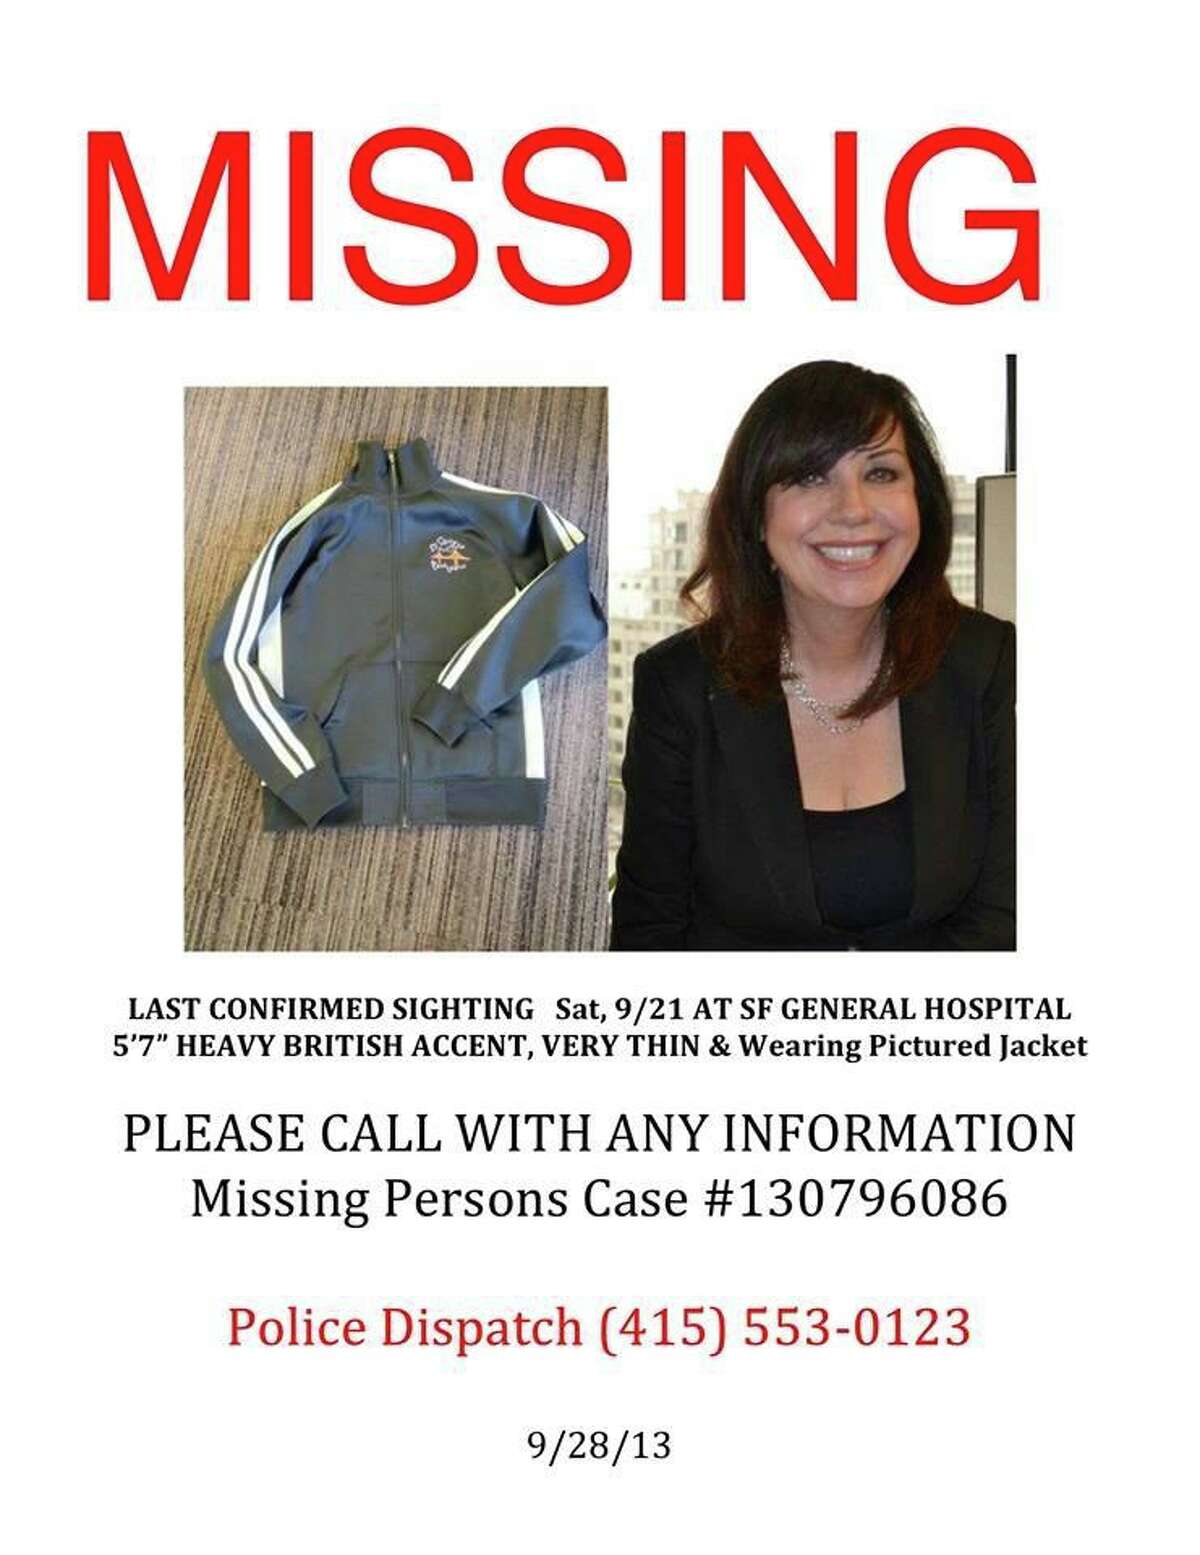 This "missing" flyer for Lynne Spalding was posted by neighbors around her York Street neighborhood.